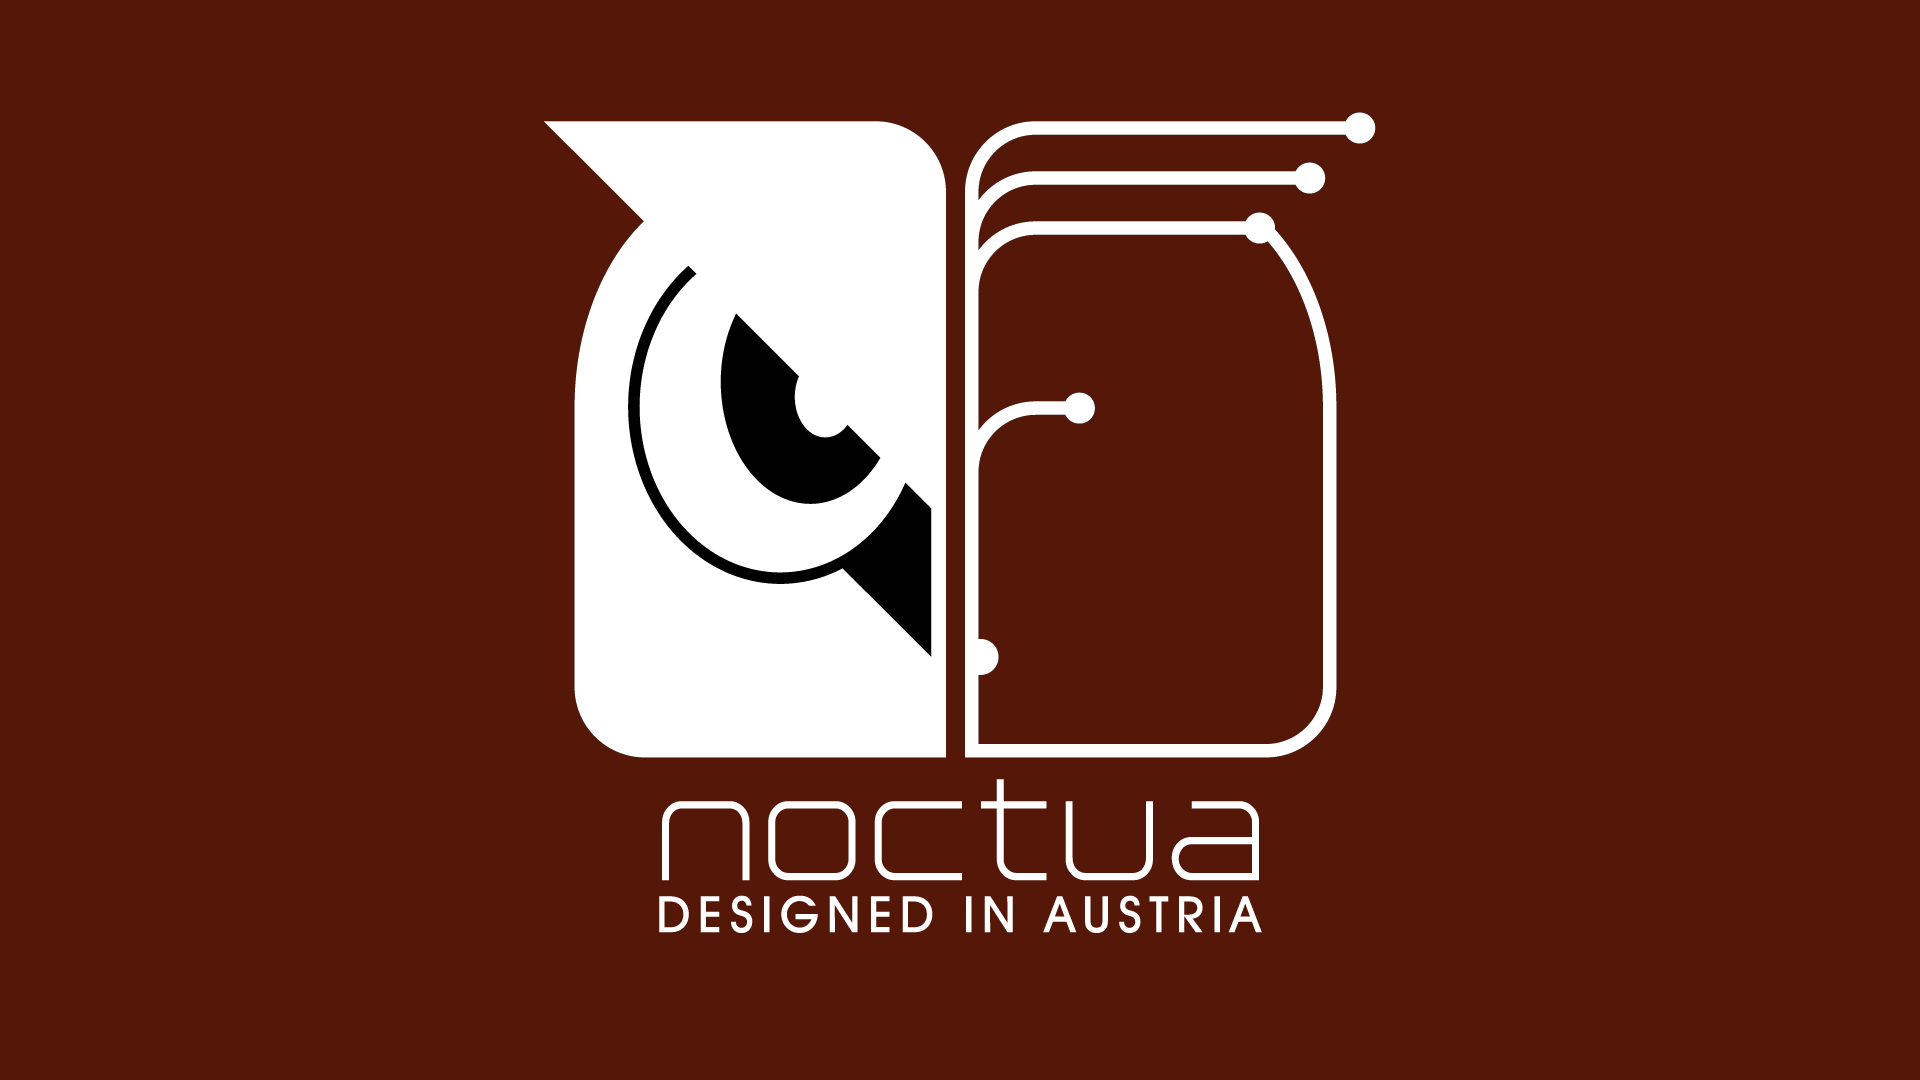 Austrian Manufacturing Pany Noctua Has E Up With Some New